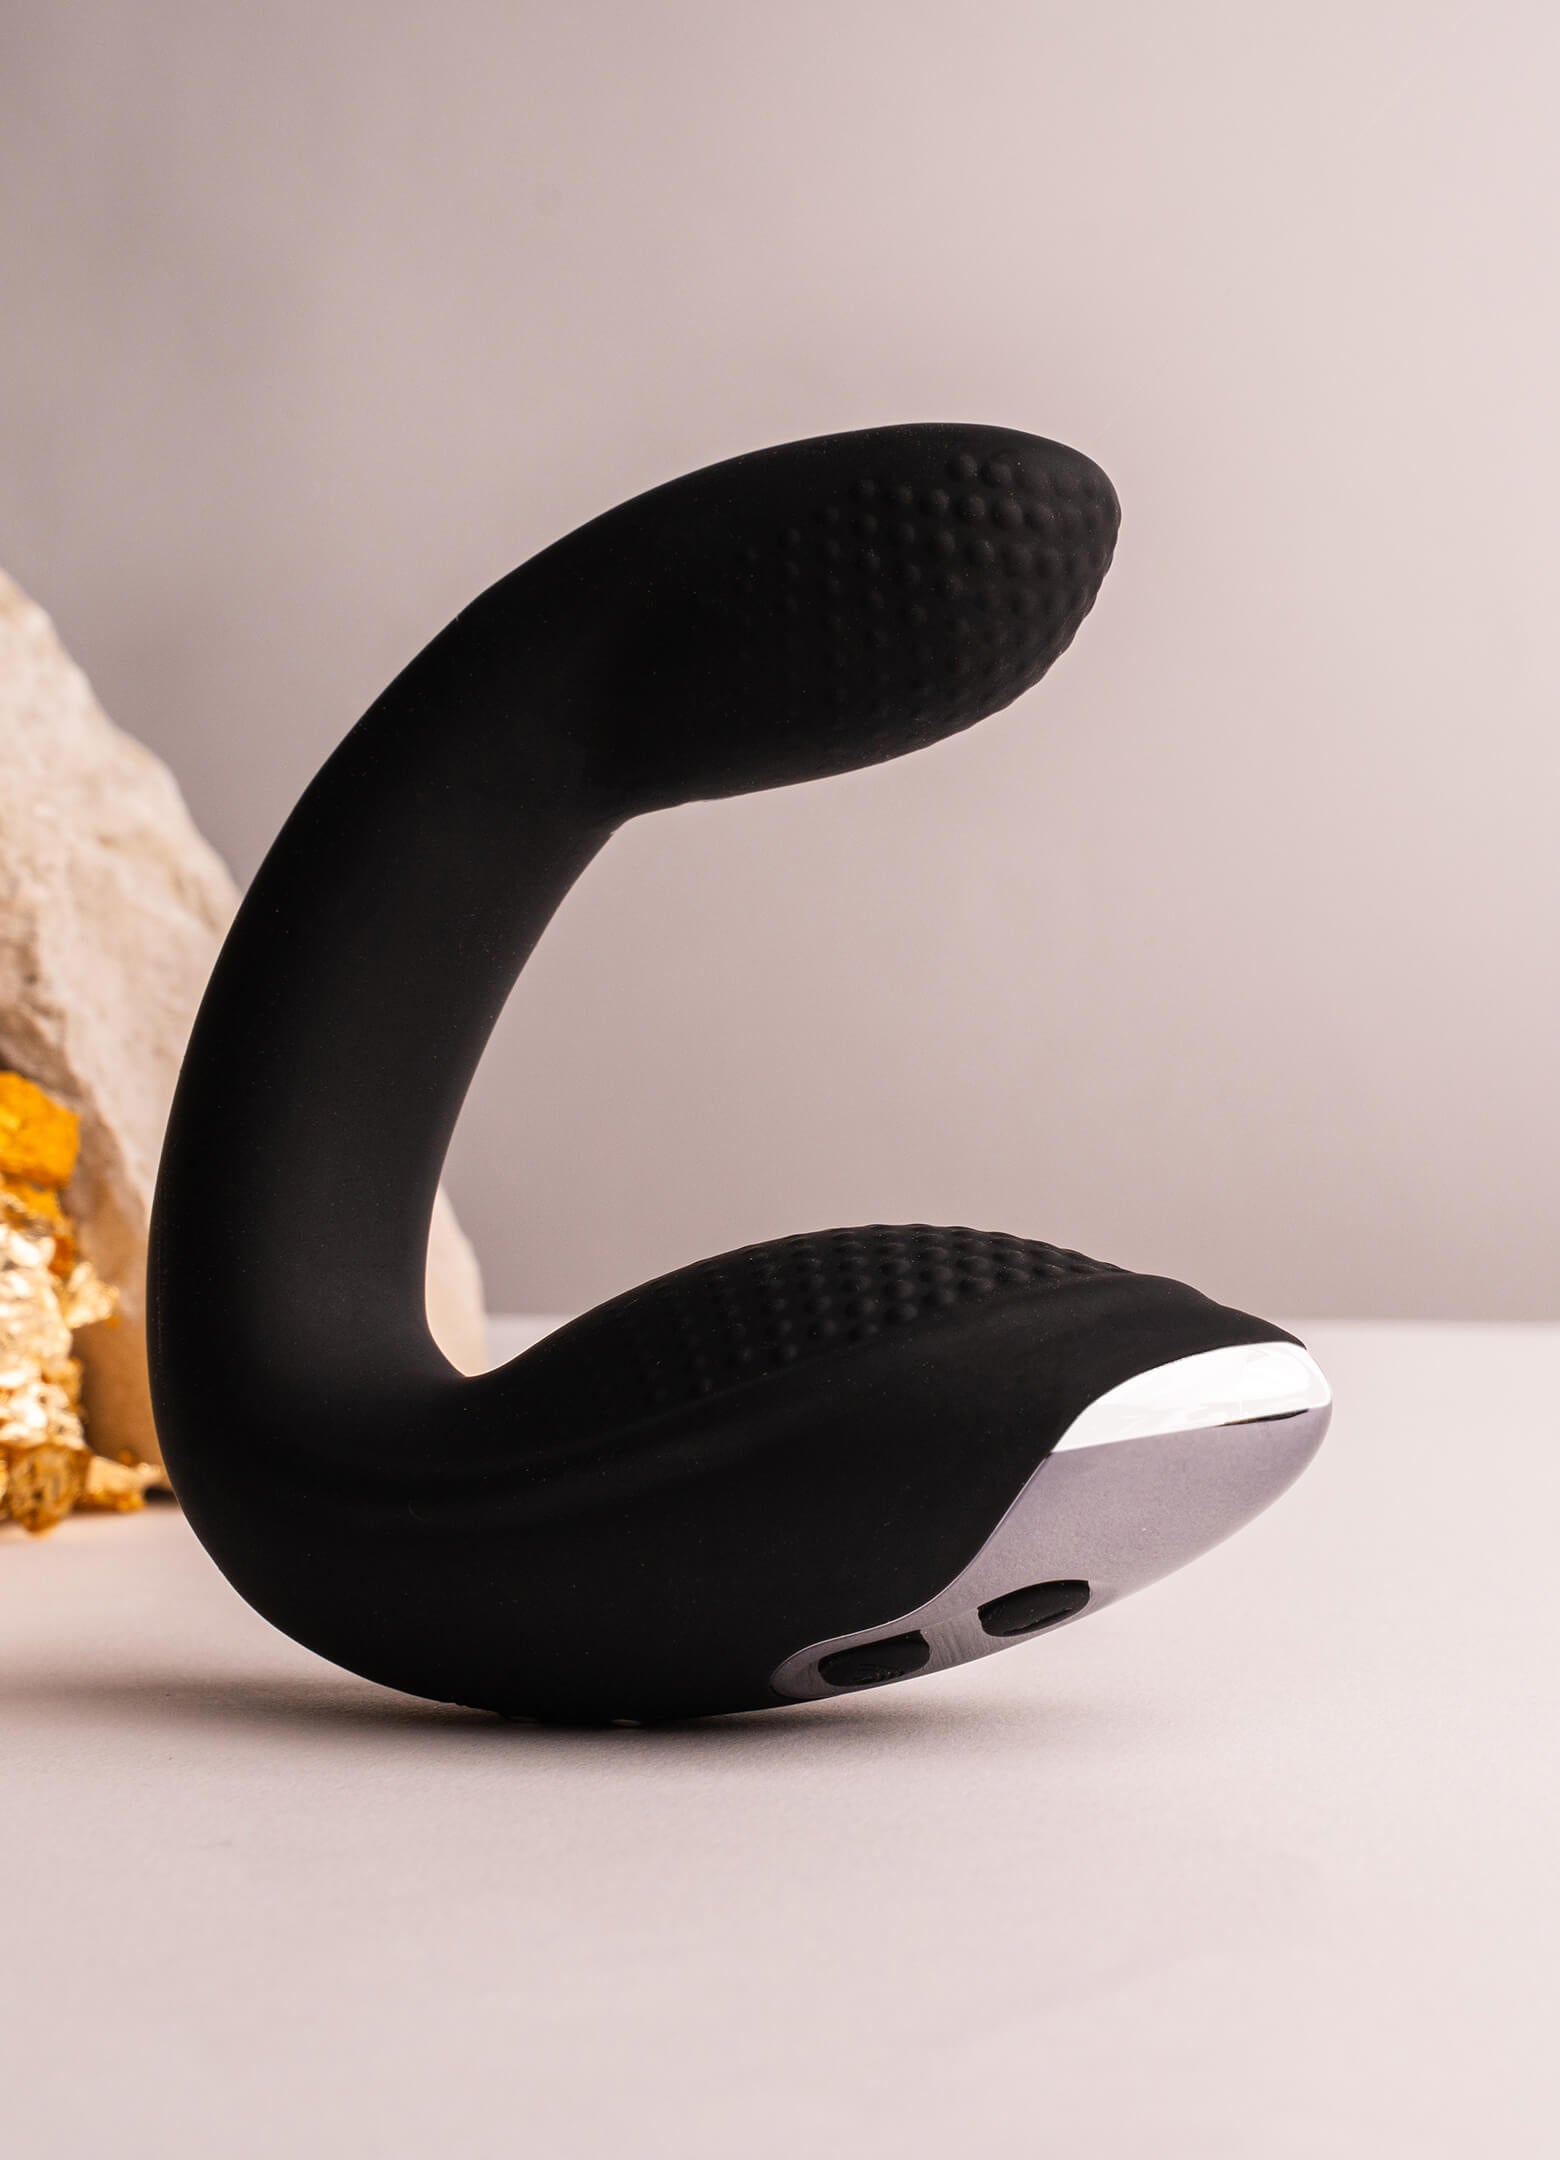 Vibrating C-shaped remote prostate massager with perineum stimulation base in black.